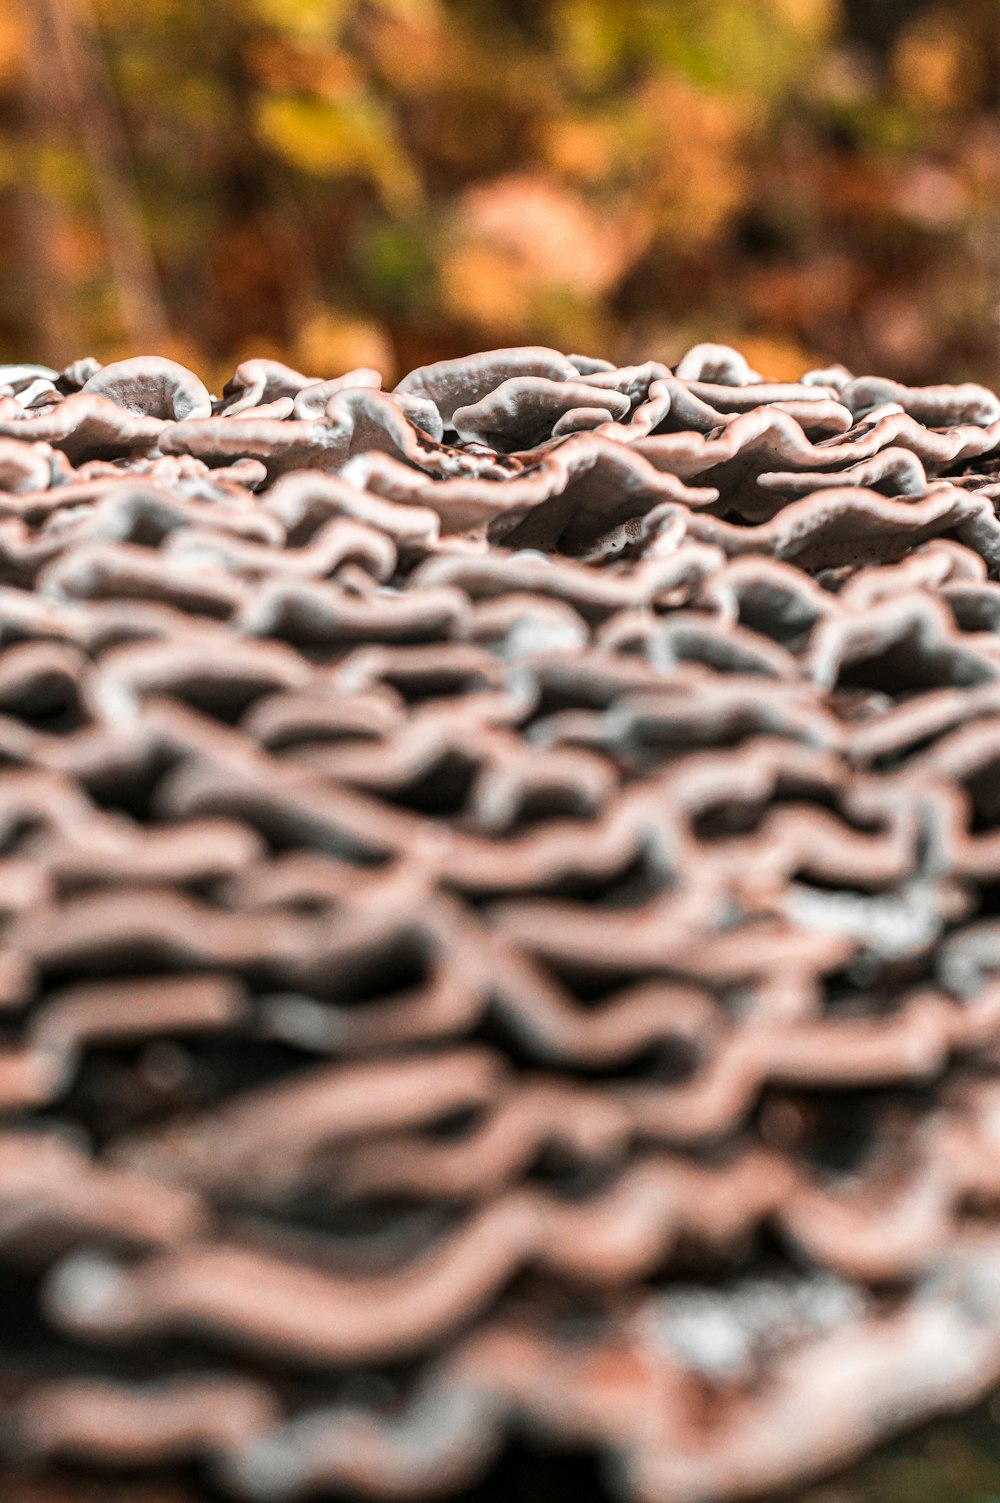 a close up of a chain on a table